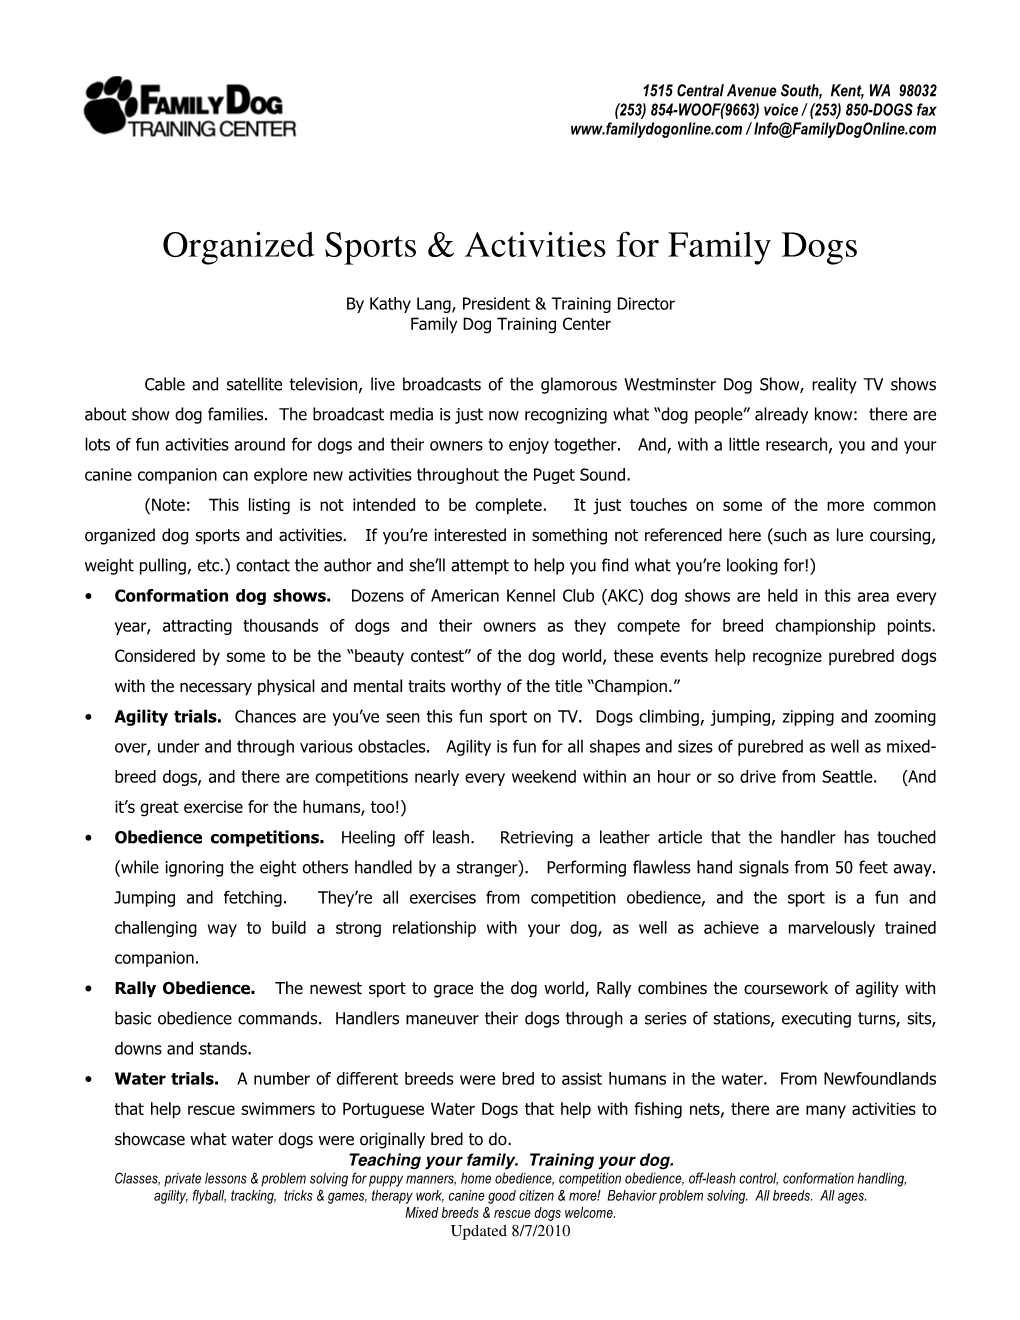 Organized Sports & Activities for Family Dogs